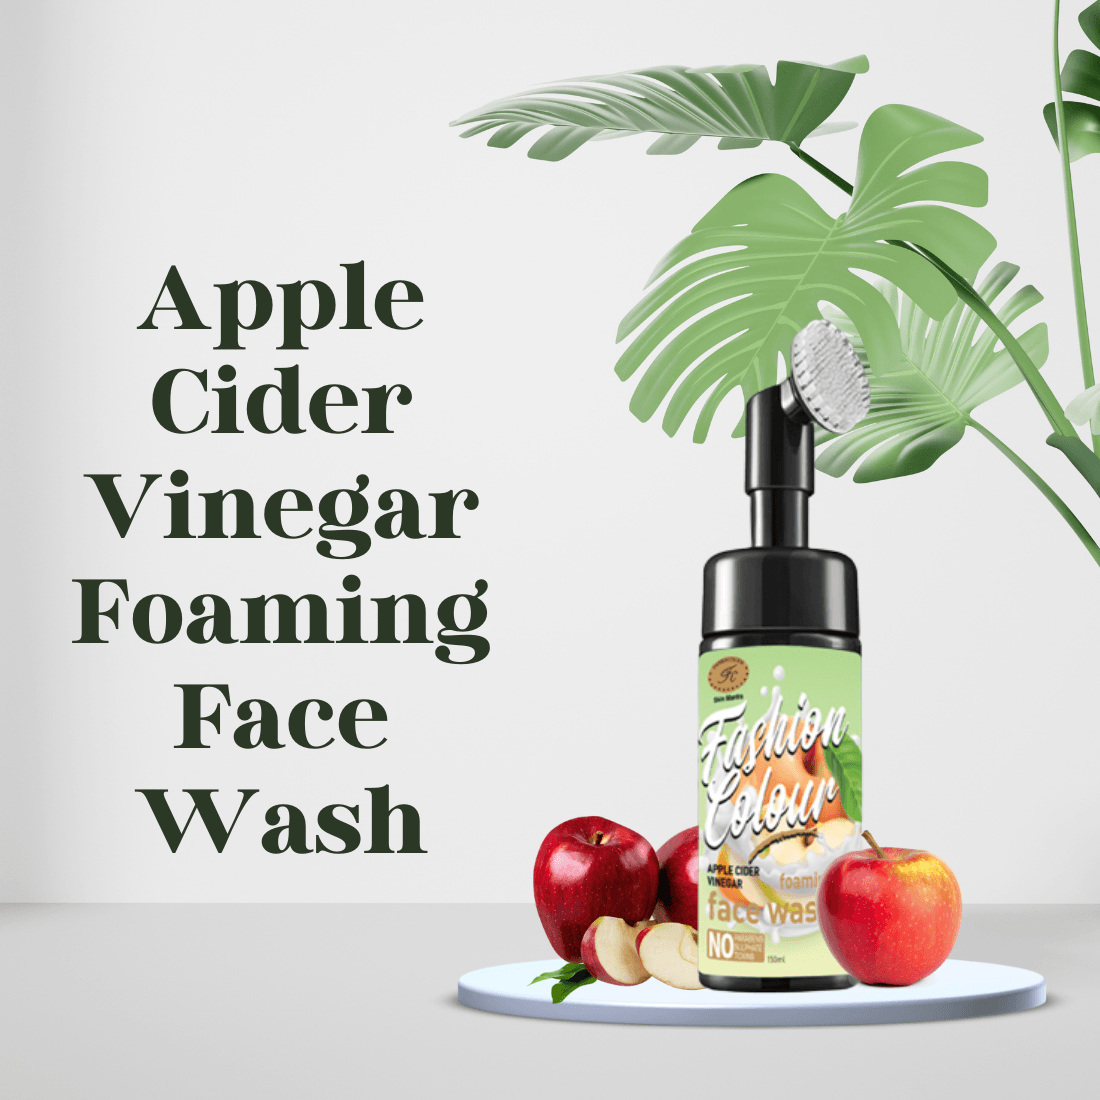 apple cider apple cider vinegar foaming face wash apple cider vinegar drink apple cider drink best apple cider making apple cider dry apple cider apple cider from apple juice green apple cider organic apple cider vinegar drink foaming face wash wow reviews of wow face wash